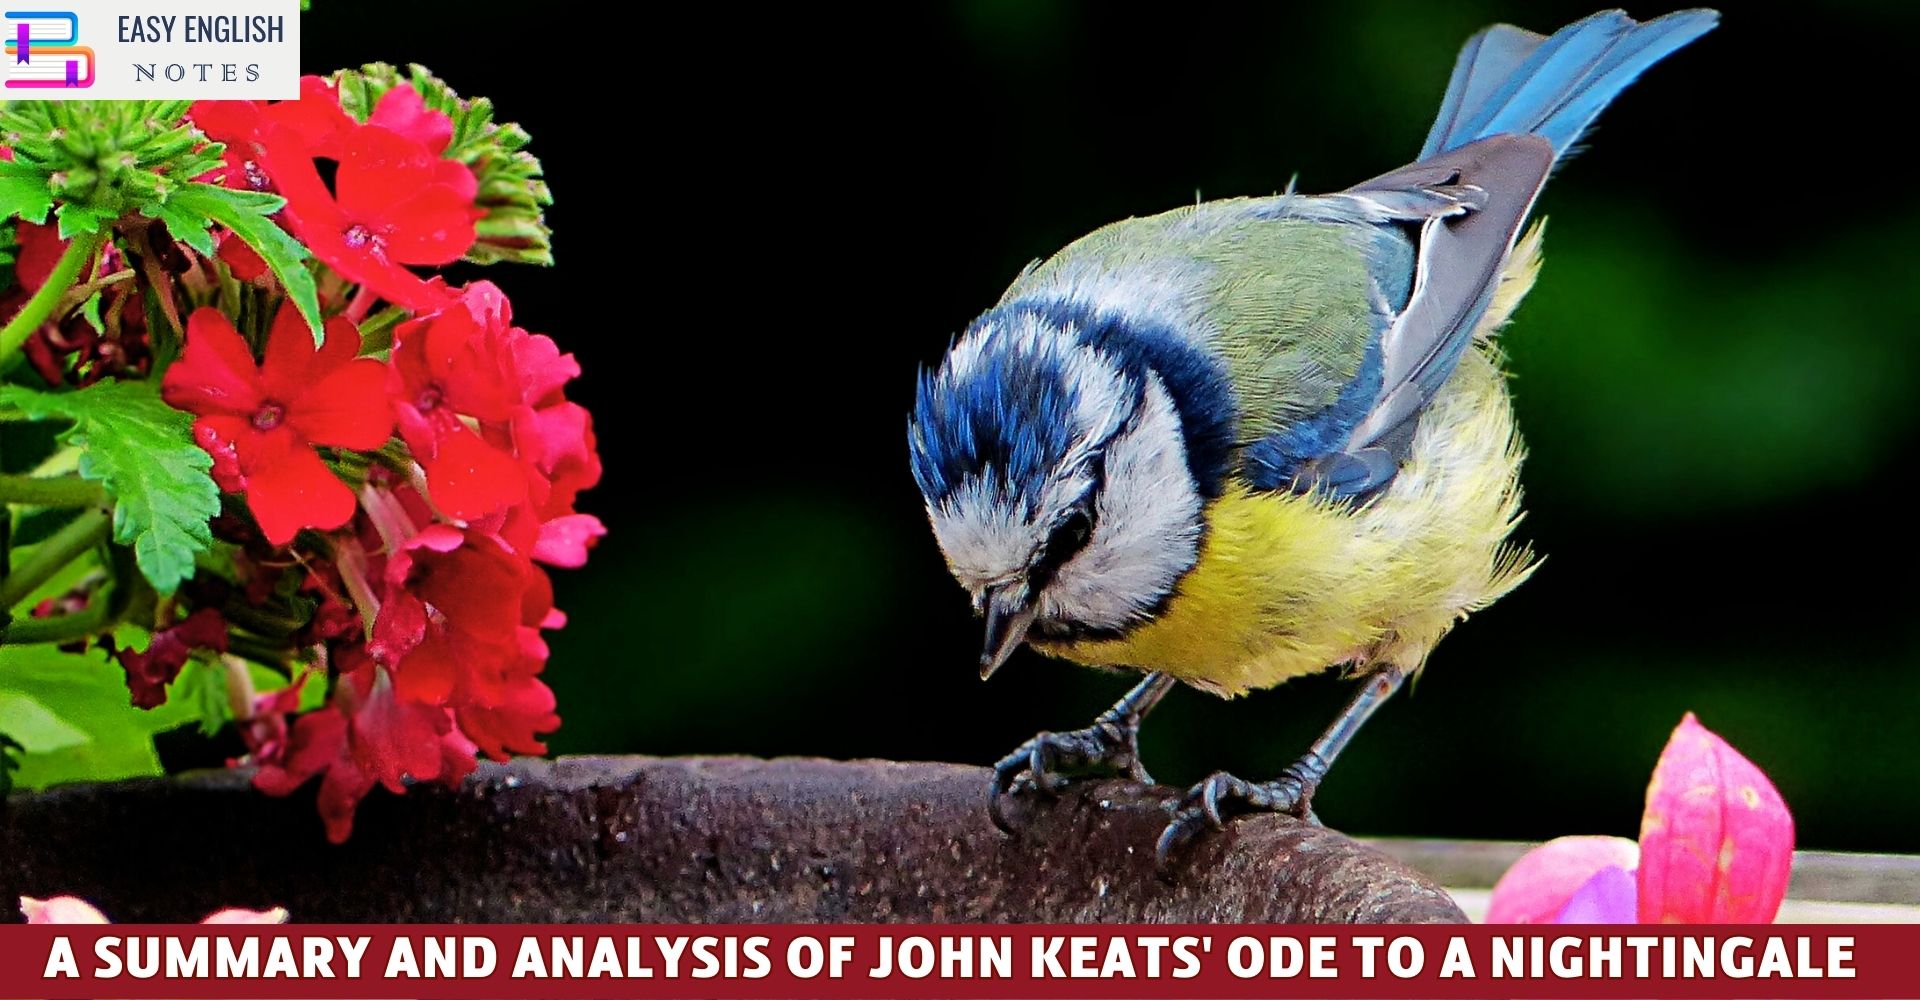 A Summary and Analysis of John Keats' Ode to a Nightingale